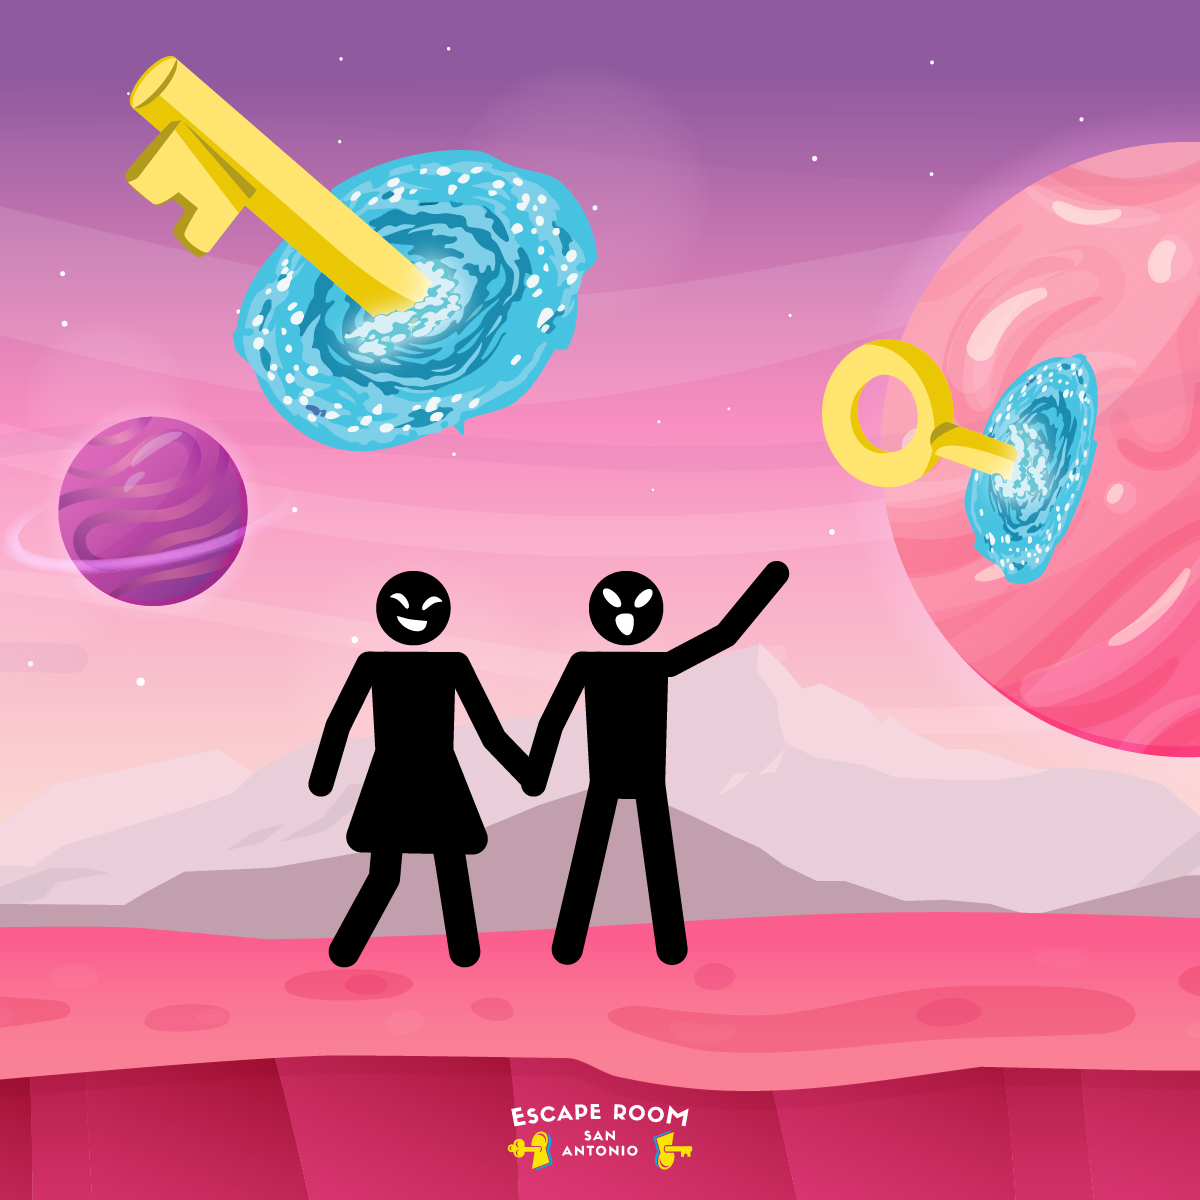 2 aliens holding hands, pink planet background with broken keys and portals in the sky. 3 Ways Escape Rooms Are For All Group Sizes.